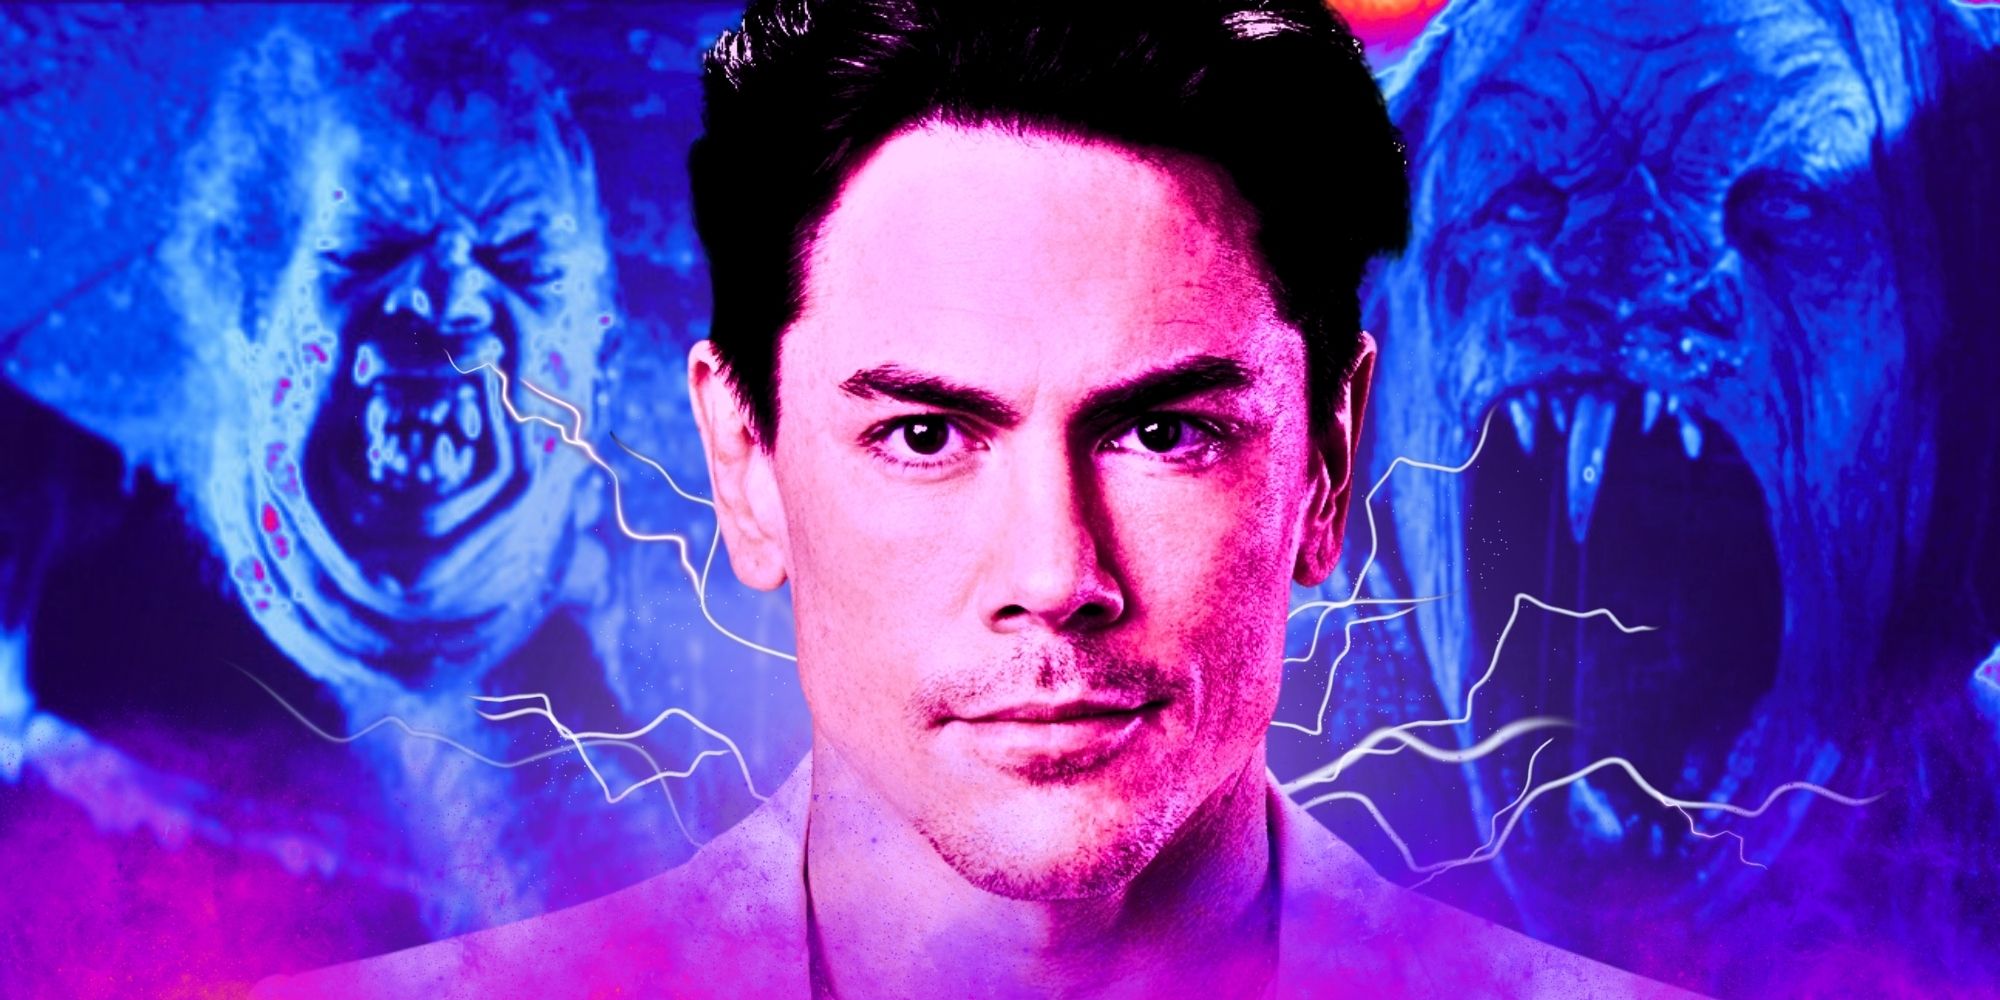 A Vanderpump Rules Tom Sandoval monster montage with pink and purple tones.